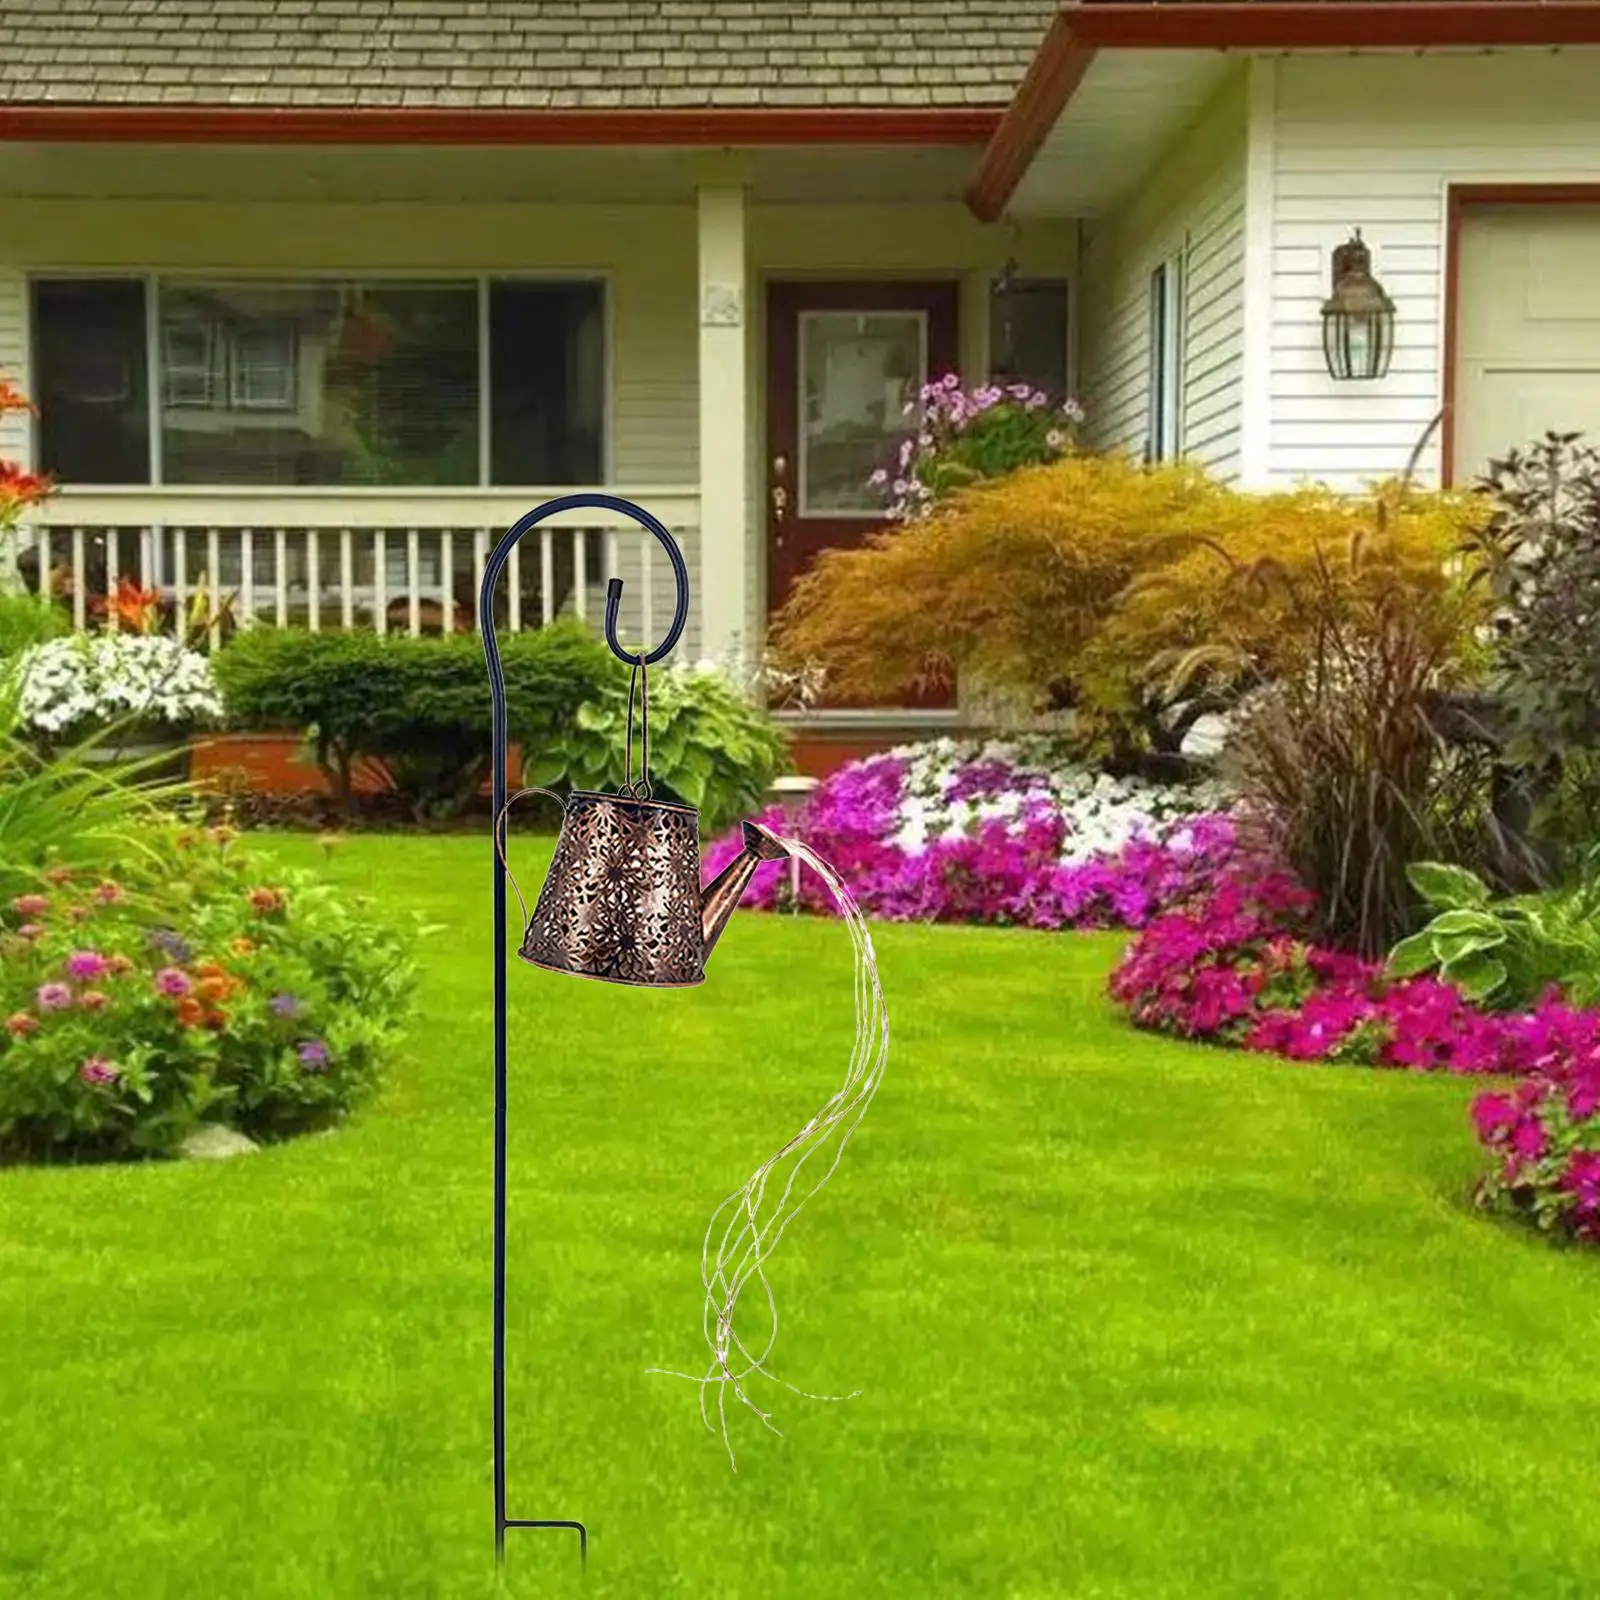 Solar Led Lights Garden Stake Outdoor Watering Can Lawn Lamps Solar Garden Lawn Landscape Pathway Lights Decorations